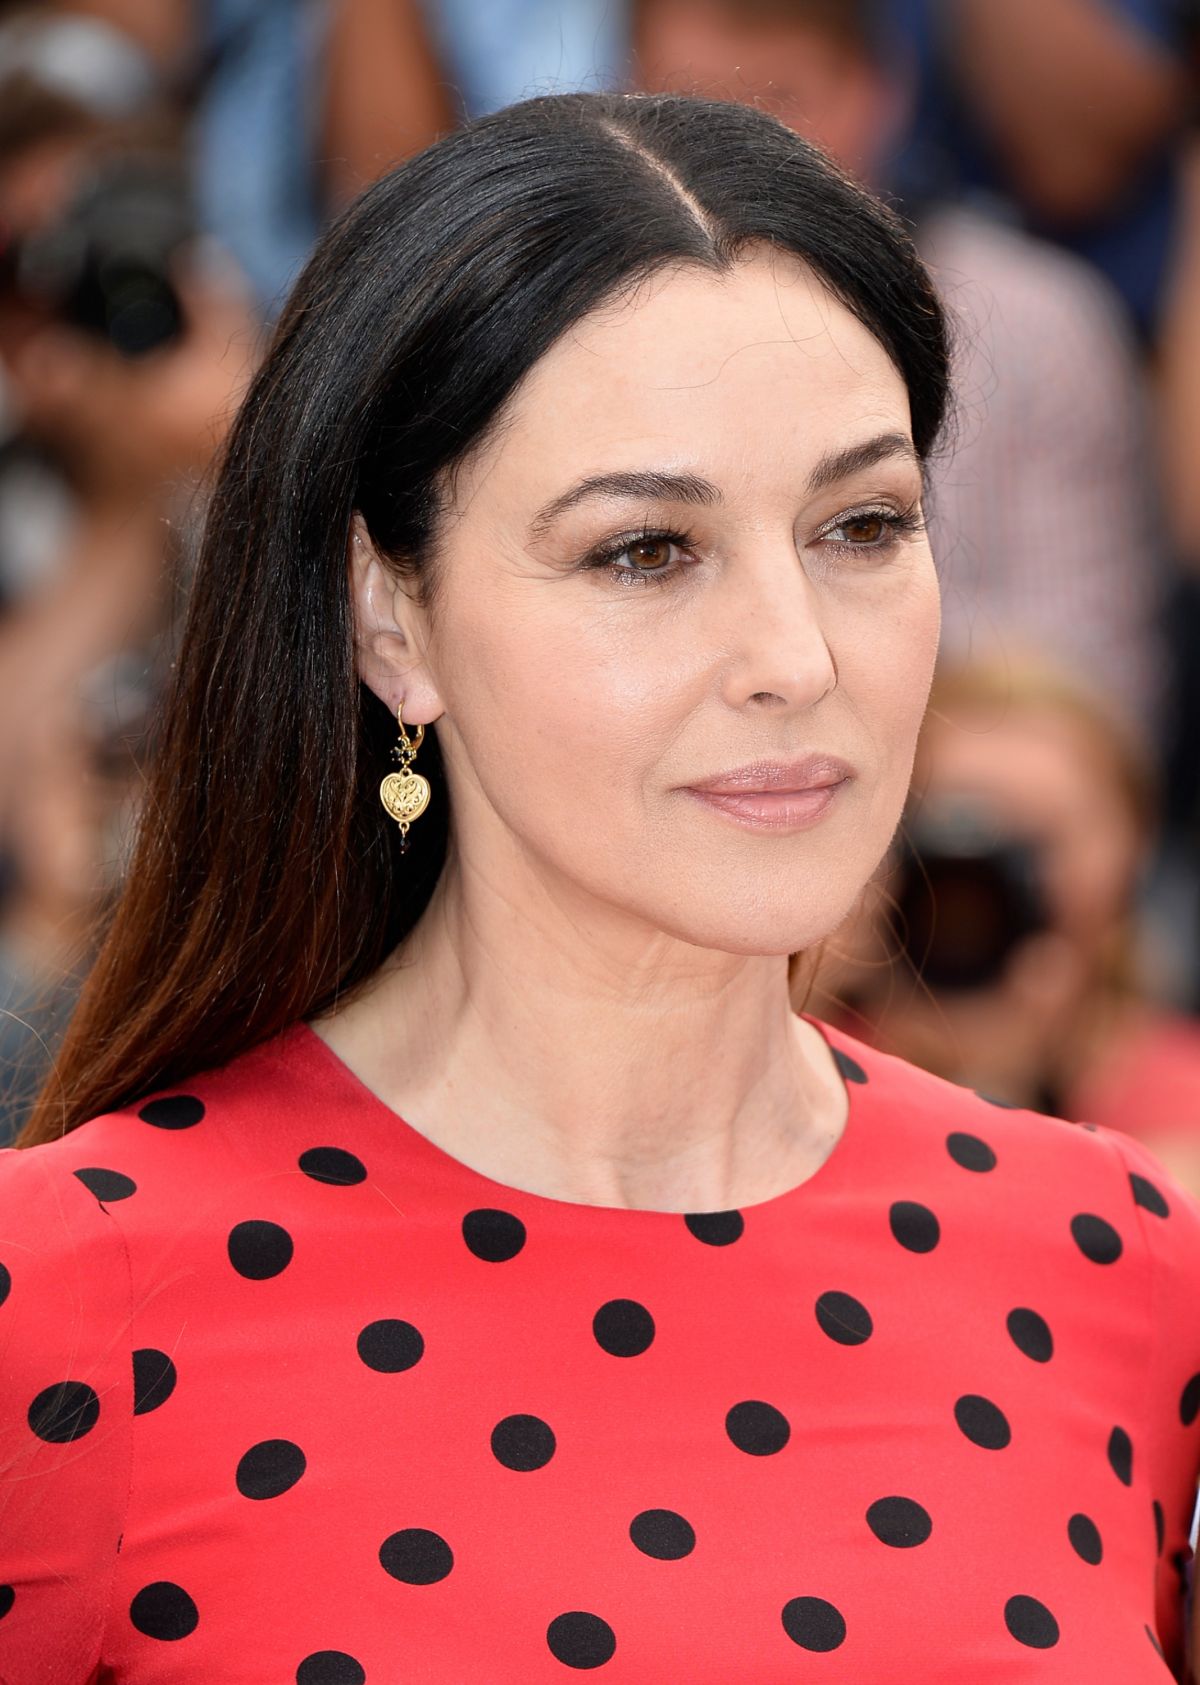 monica_bellucci_at_lemmeraviglie_photocall_at_cannes_film_festival_1